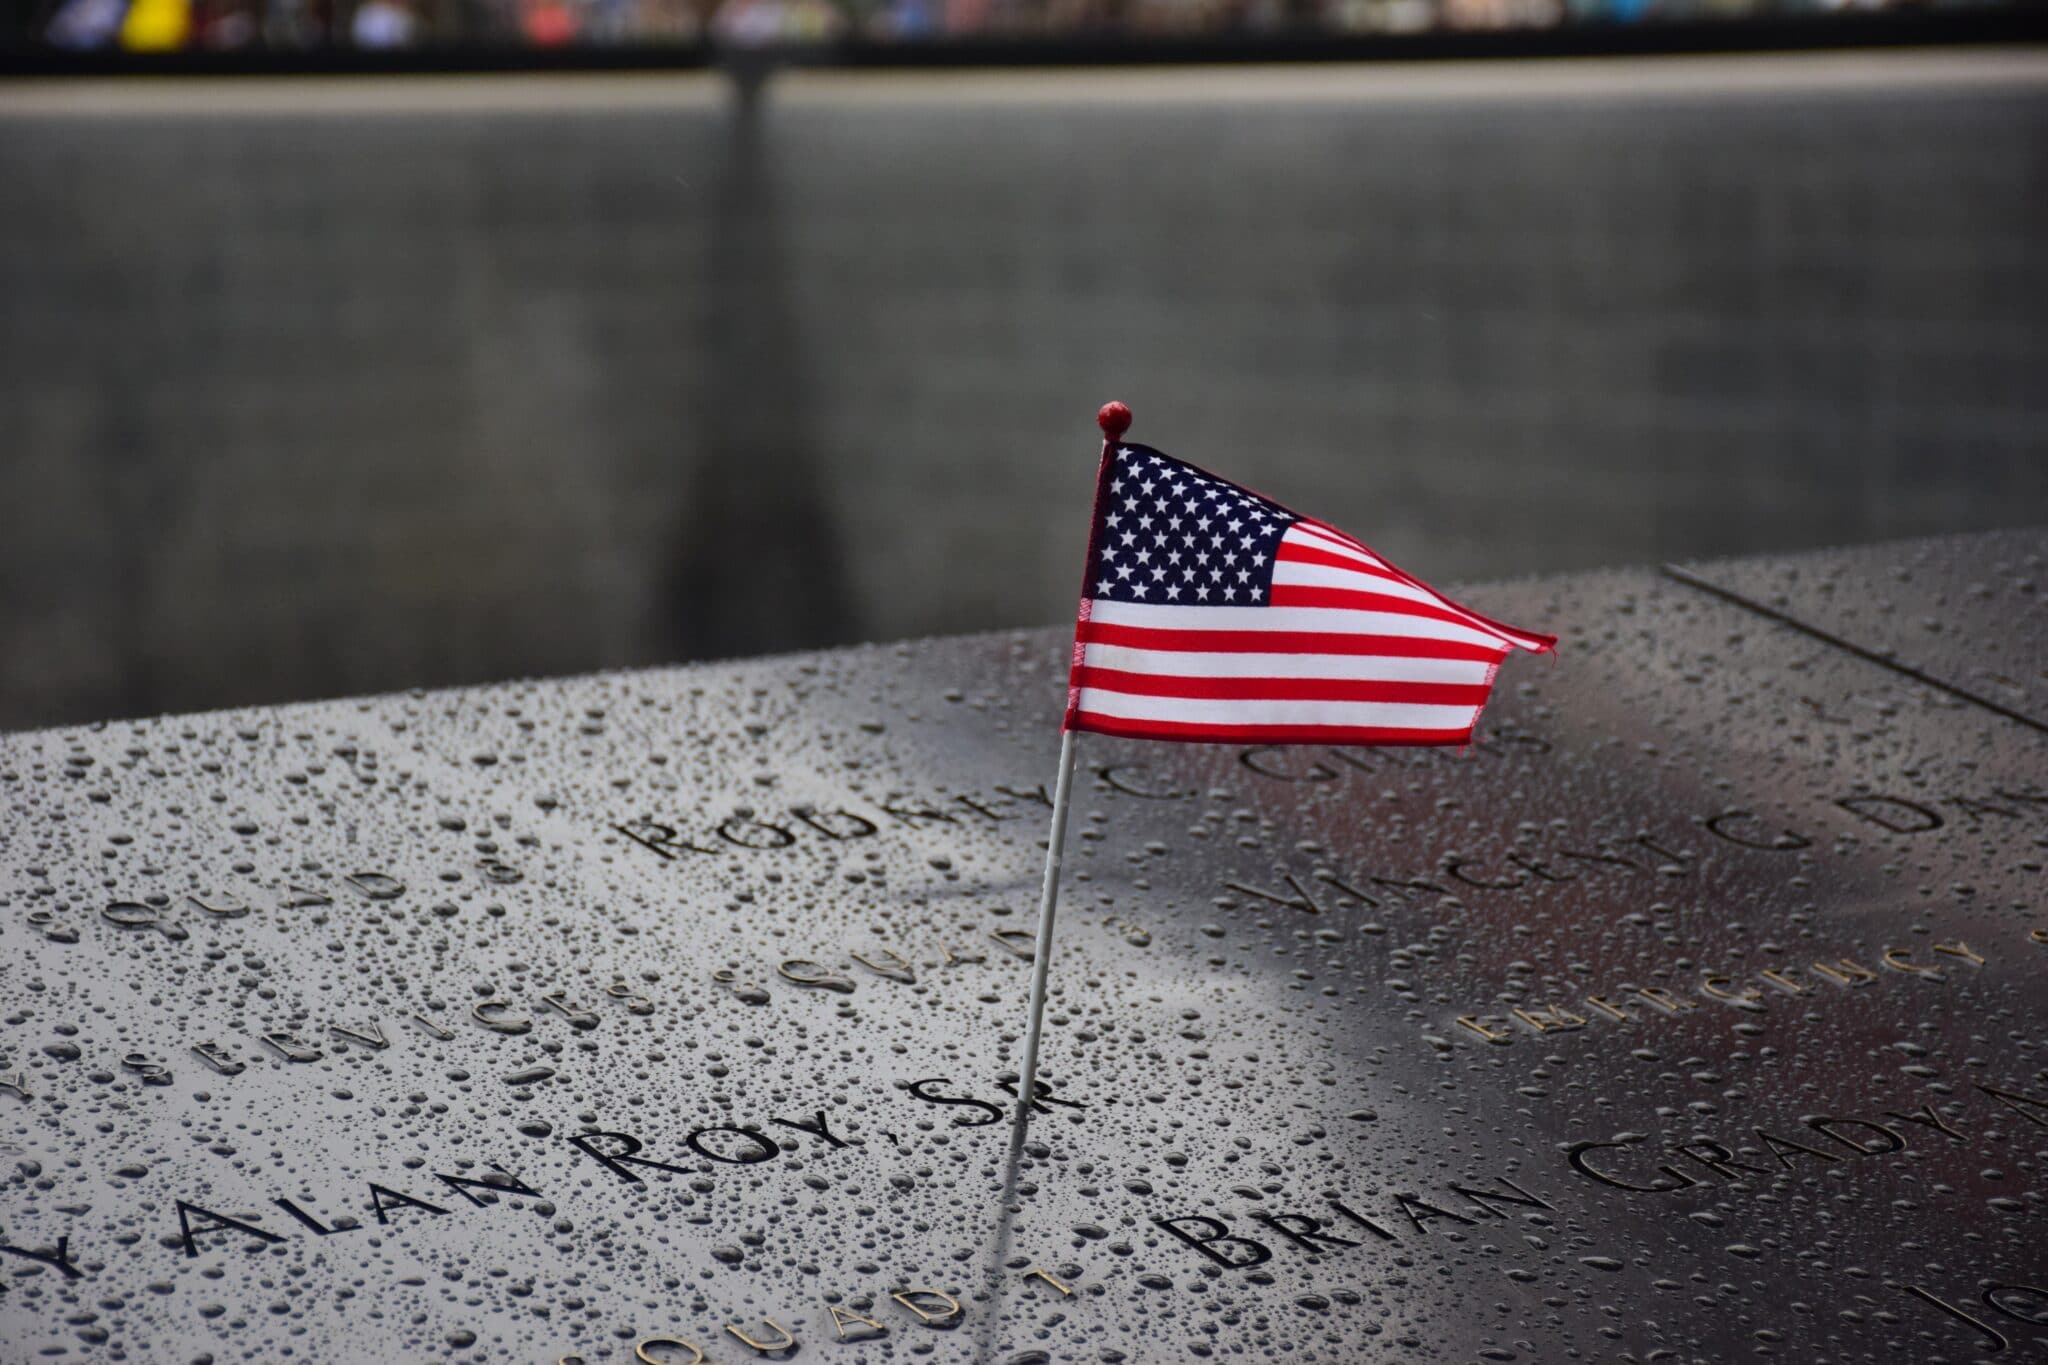 2 New 9/11 Victims' Remains Identified Ahead of 22nd Anniversary